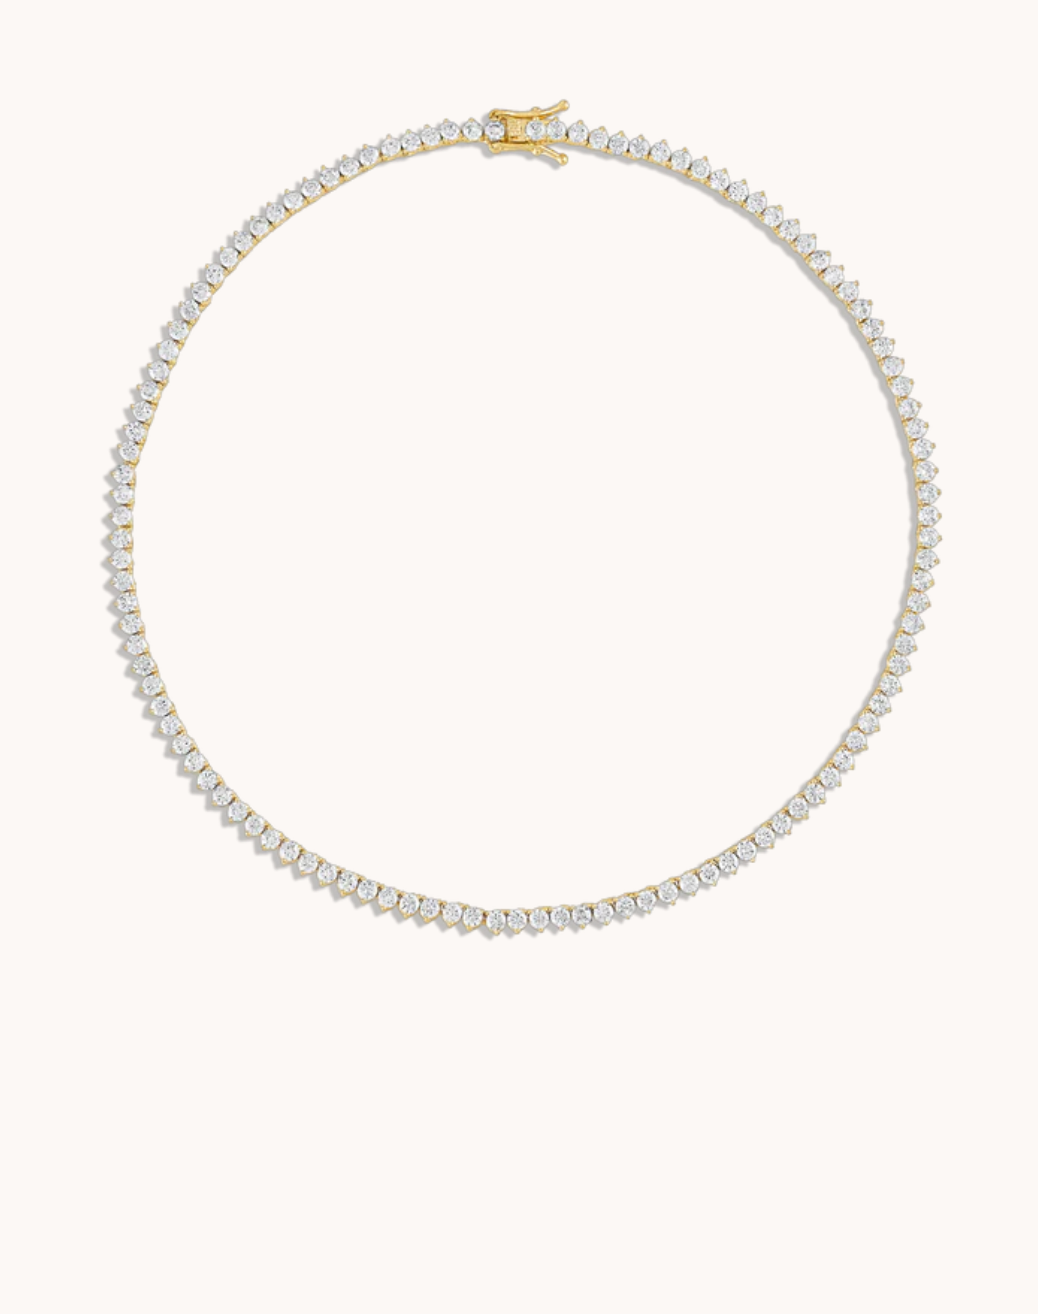 Crystal Tennis Necklace in Gold - 18"